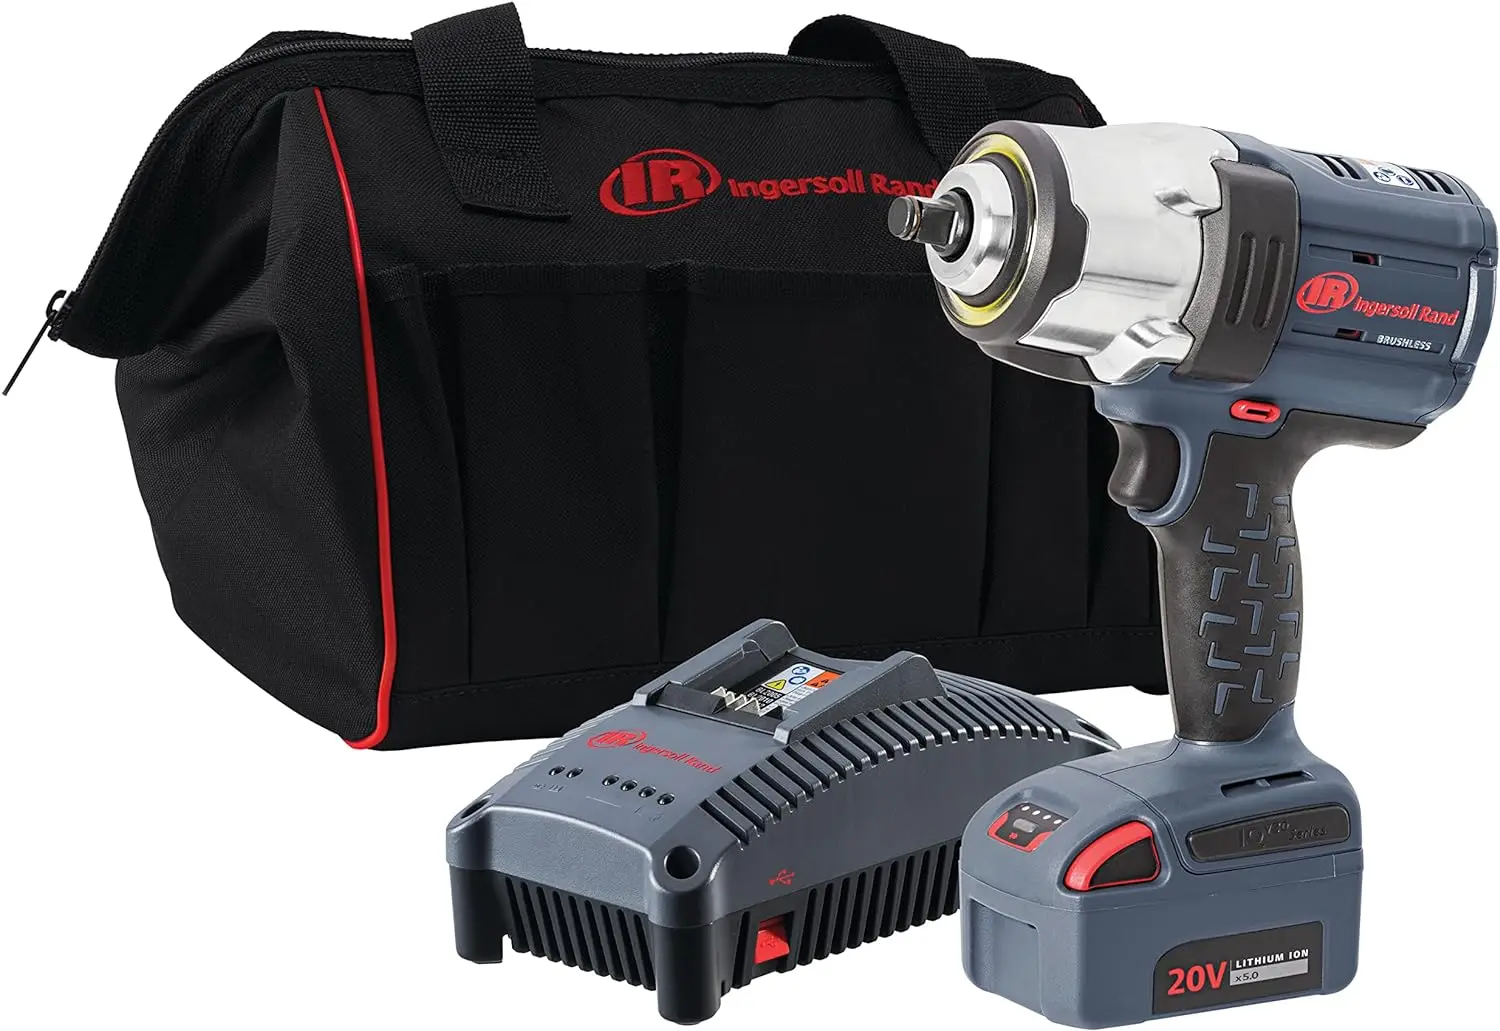 

Ingersoll Rand W7152-K12 1/2" Cordless Impact Wrench and 1 Battery Kit, 4 Power Modes, Brushless Motor, 1500 ft/lbs Nut Busting